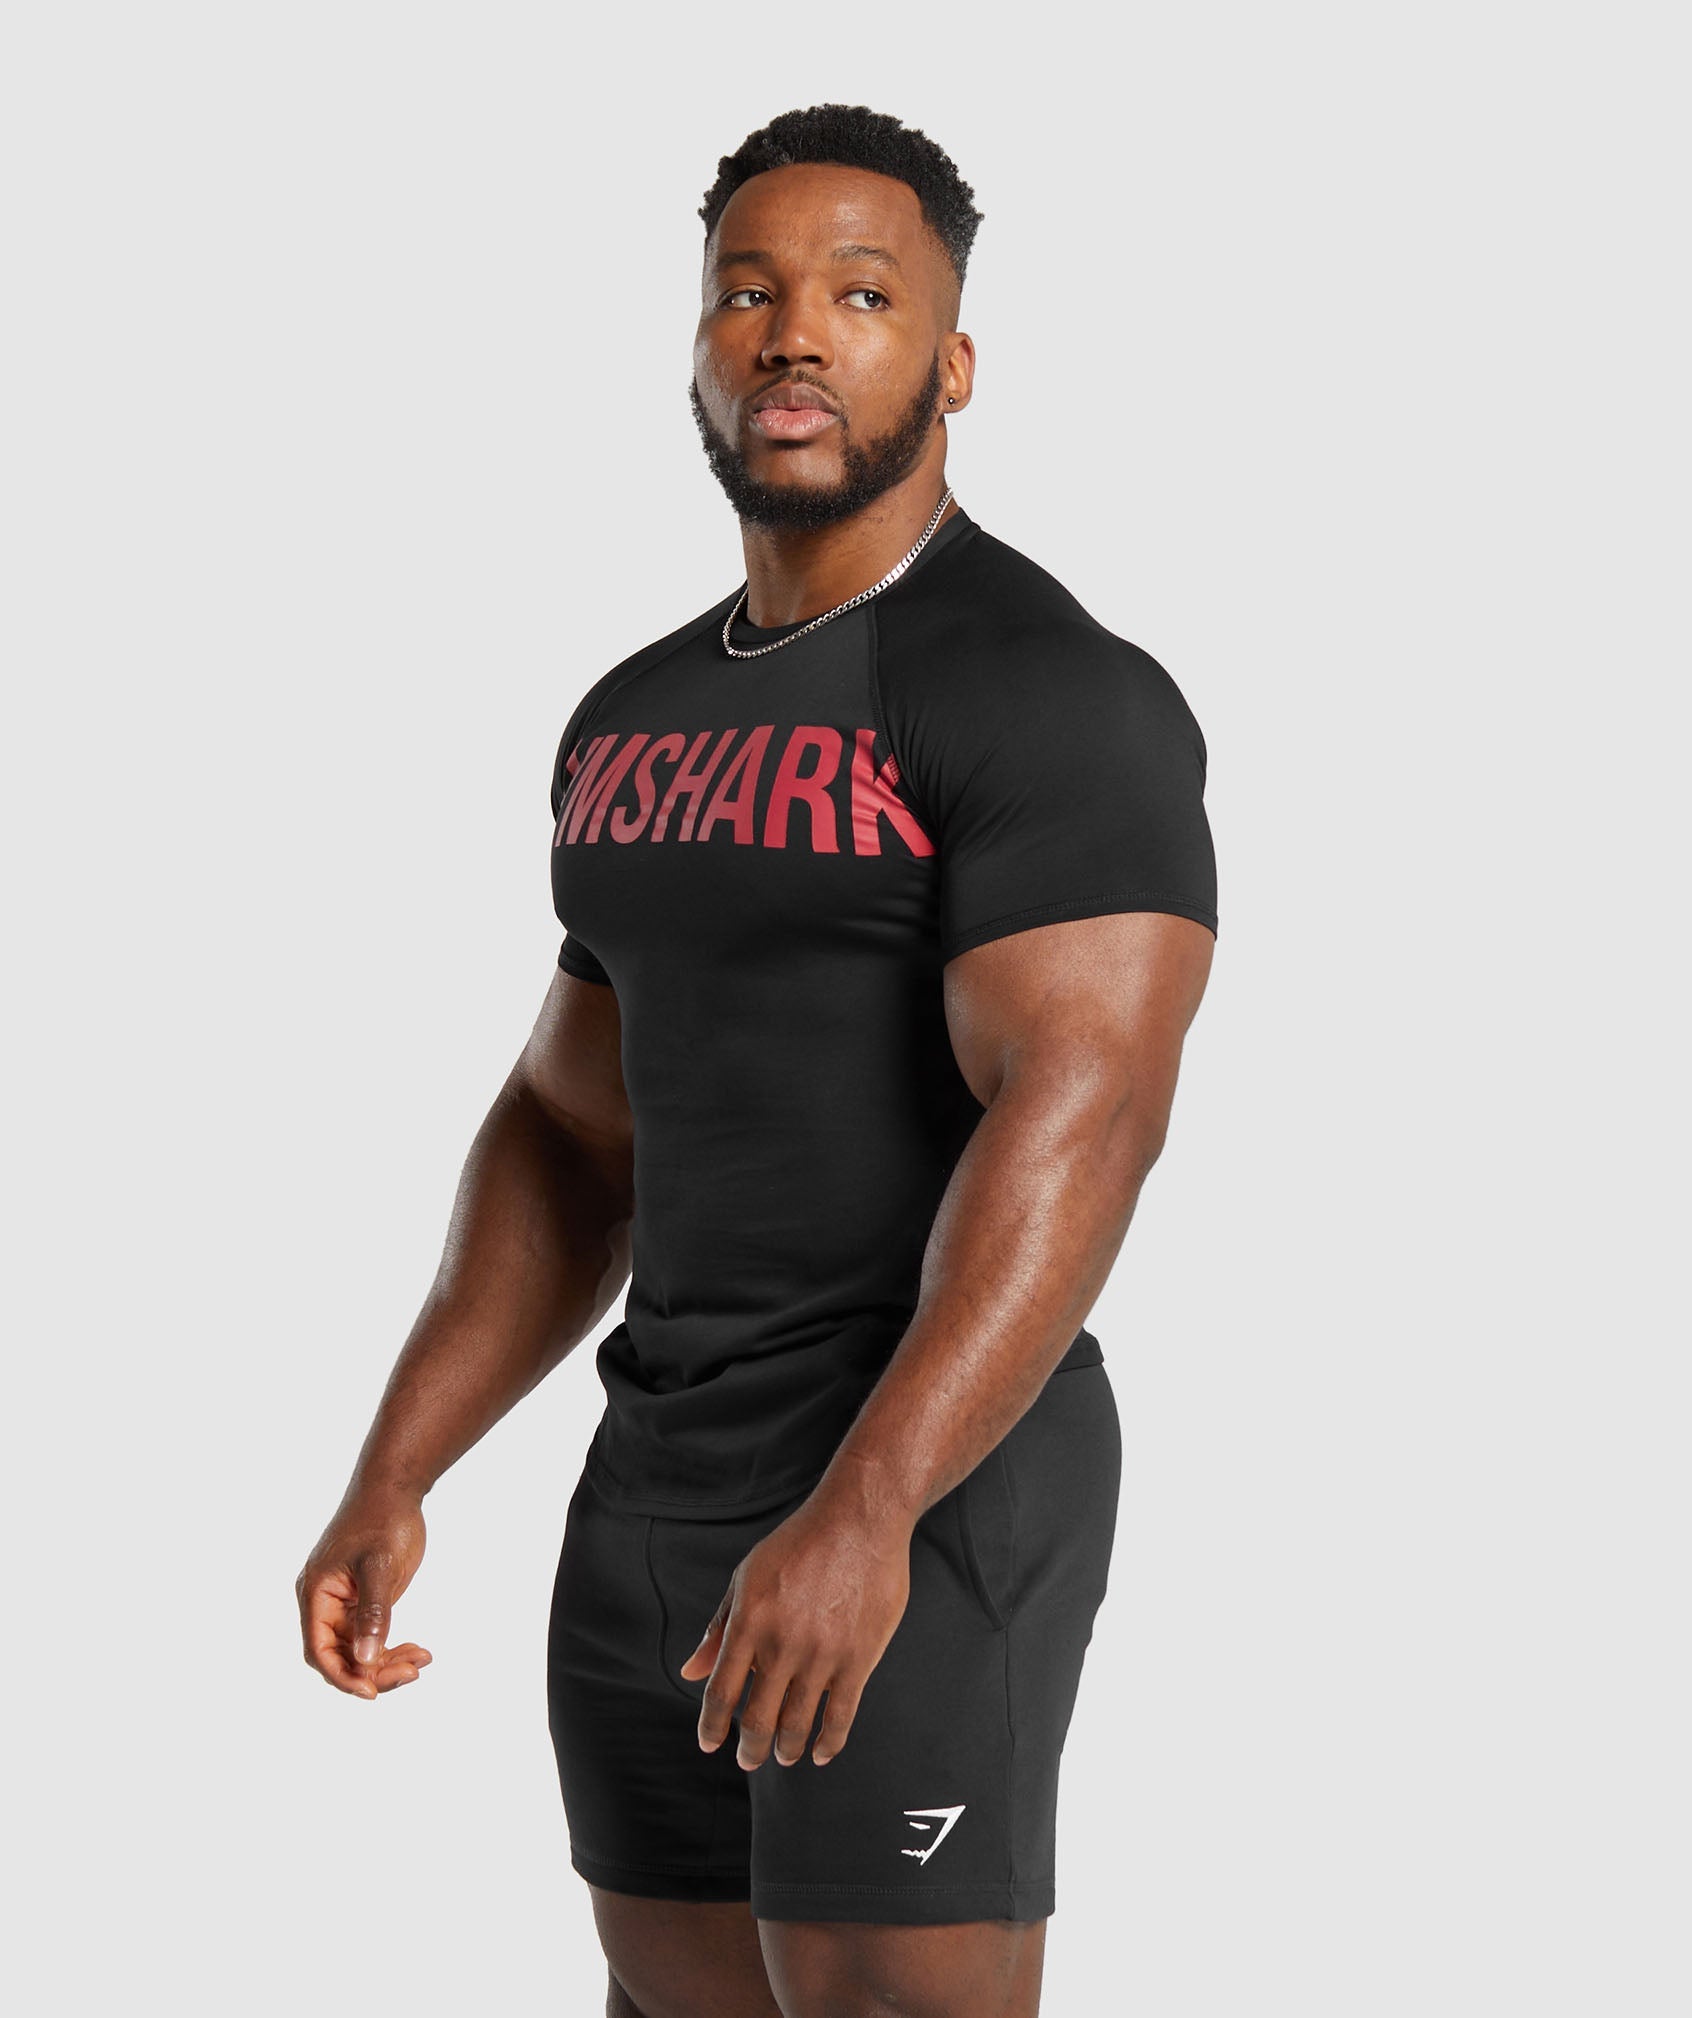 Impact Muscle T-Shirt in Black/Vivid Red - view 3